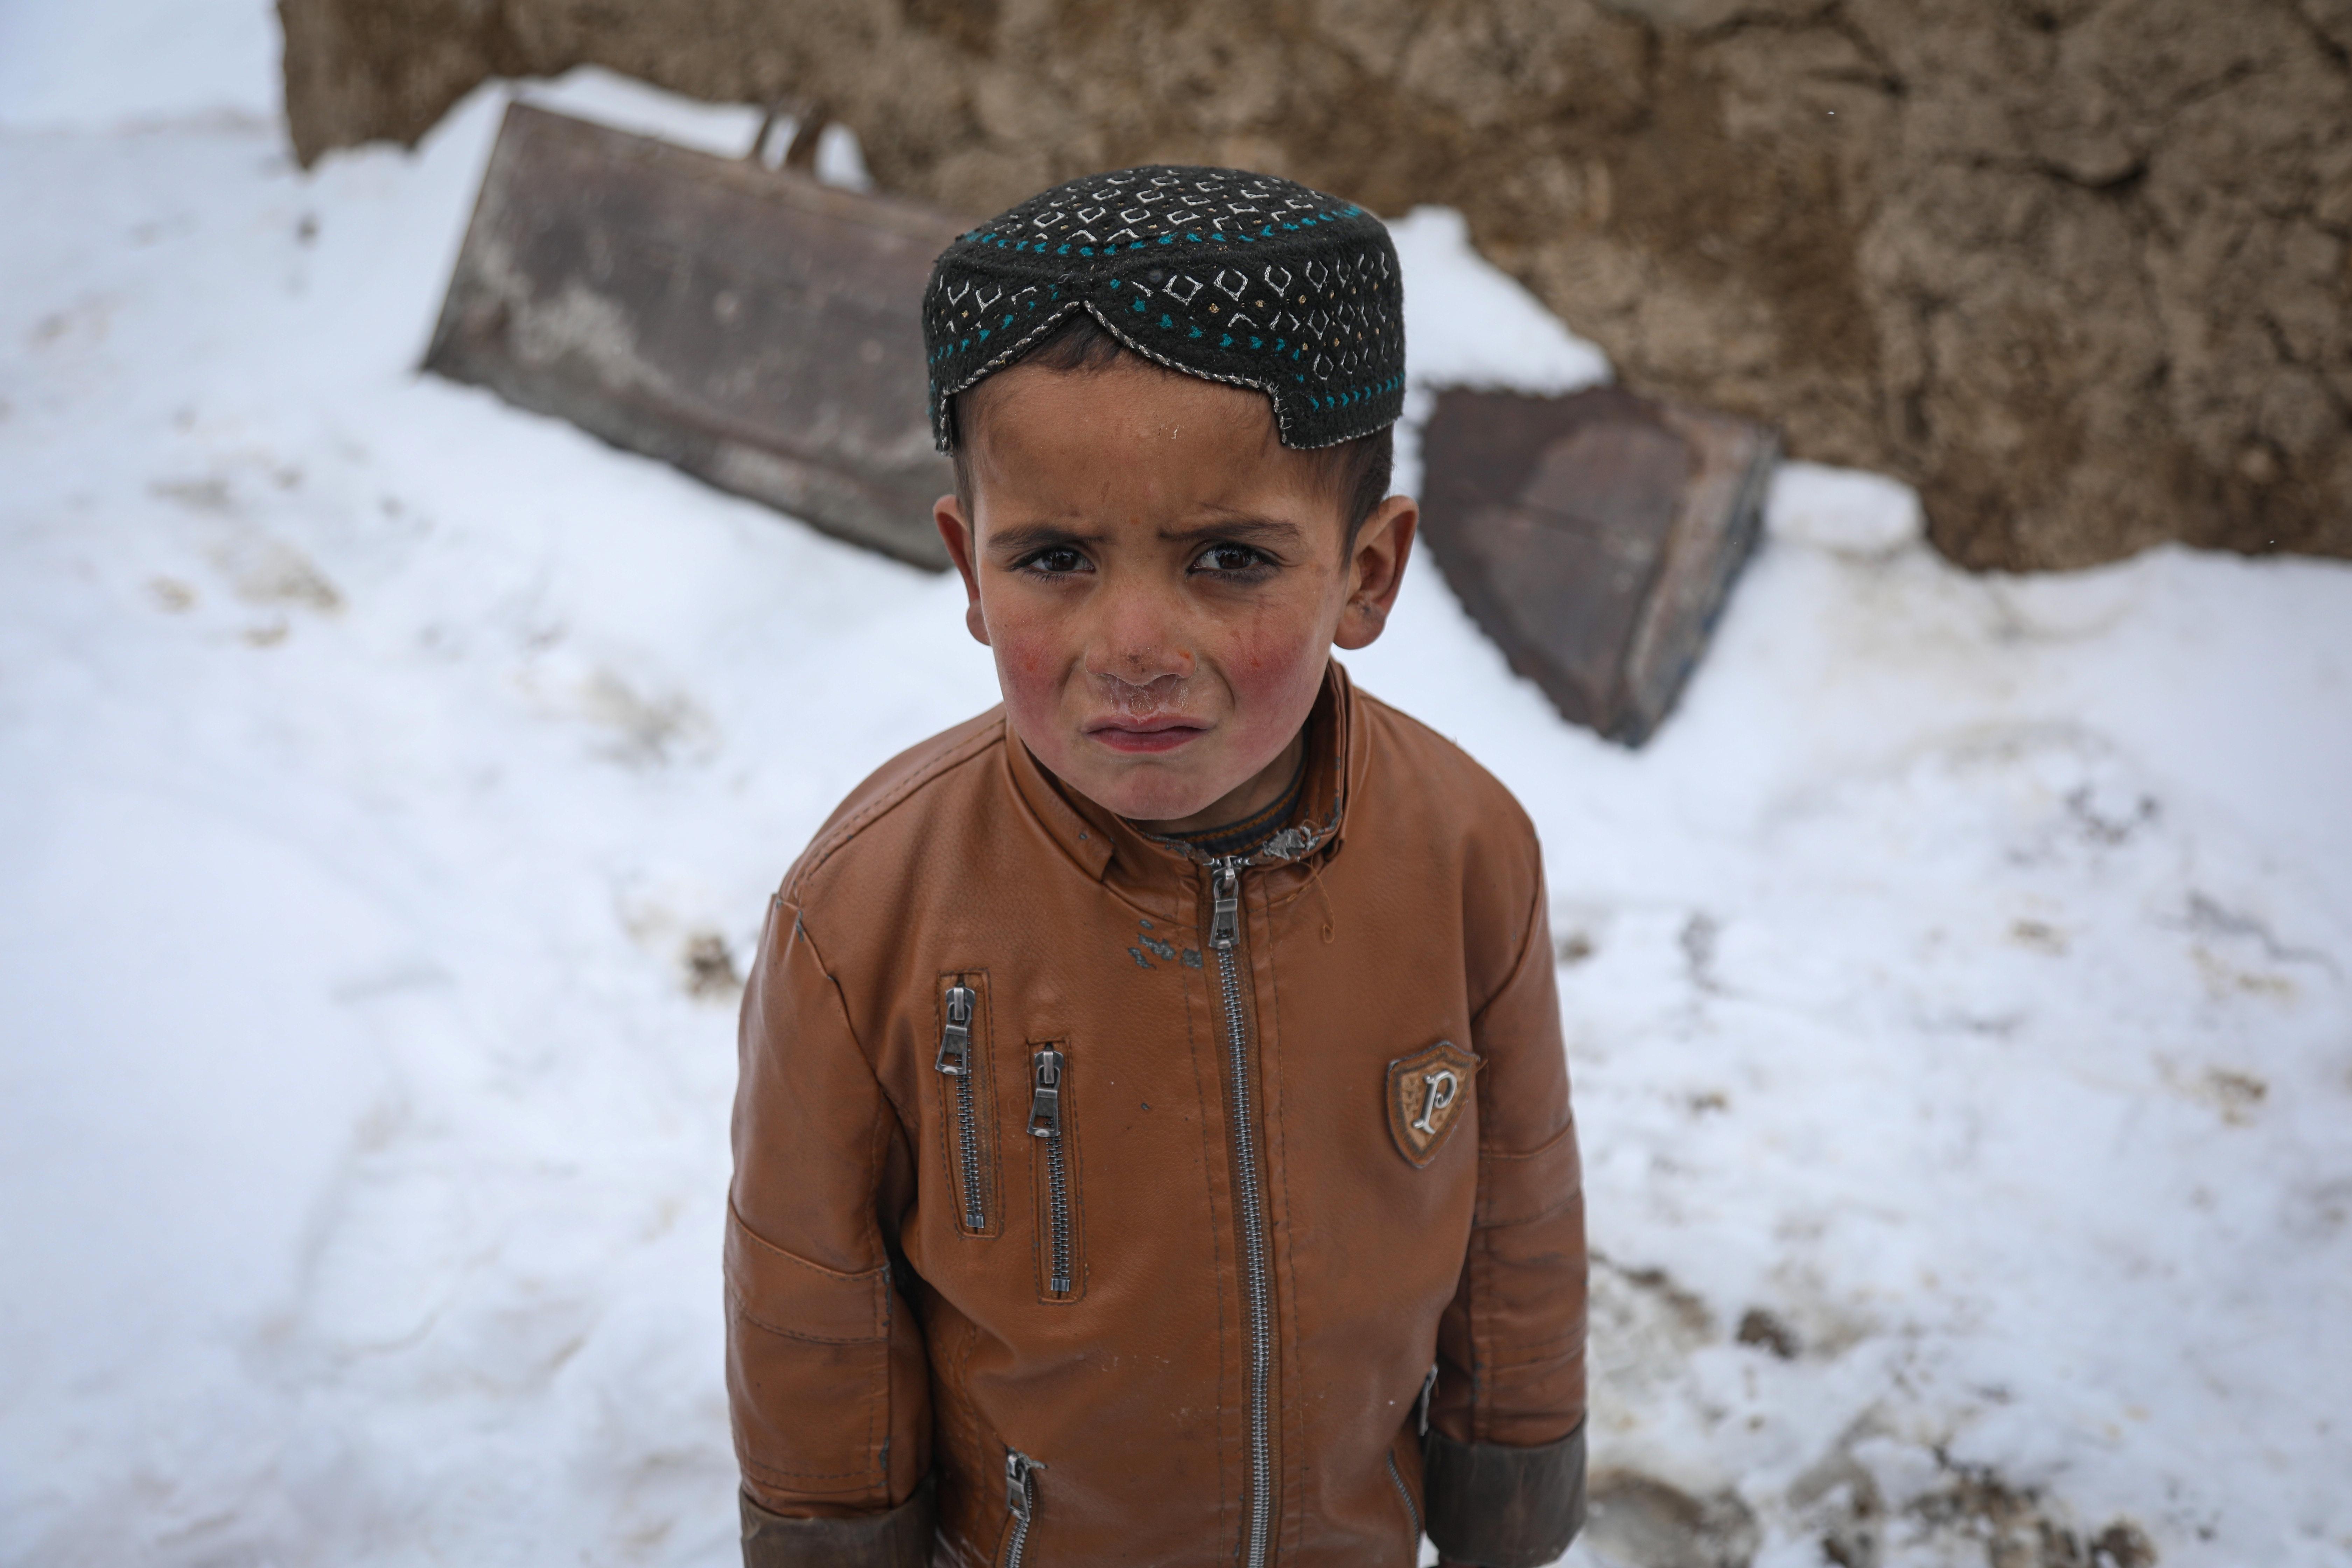 The Silent Crisis: Winter in Afghanistan